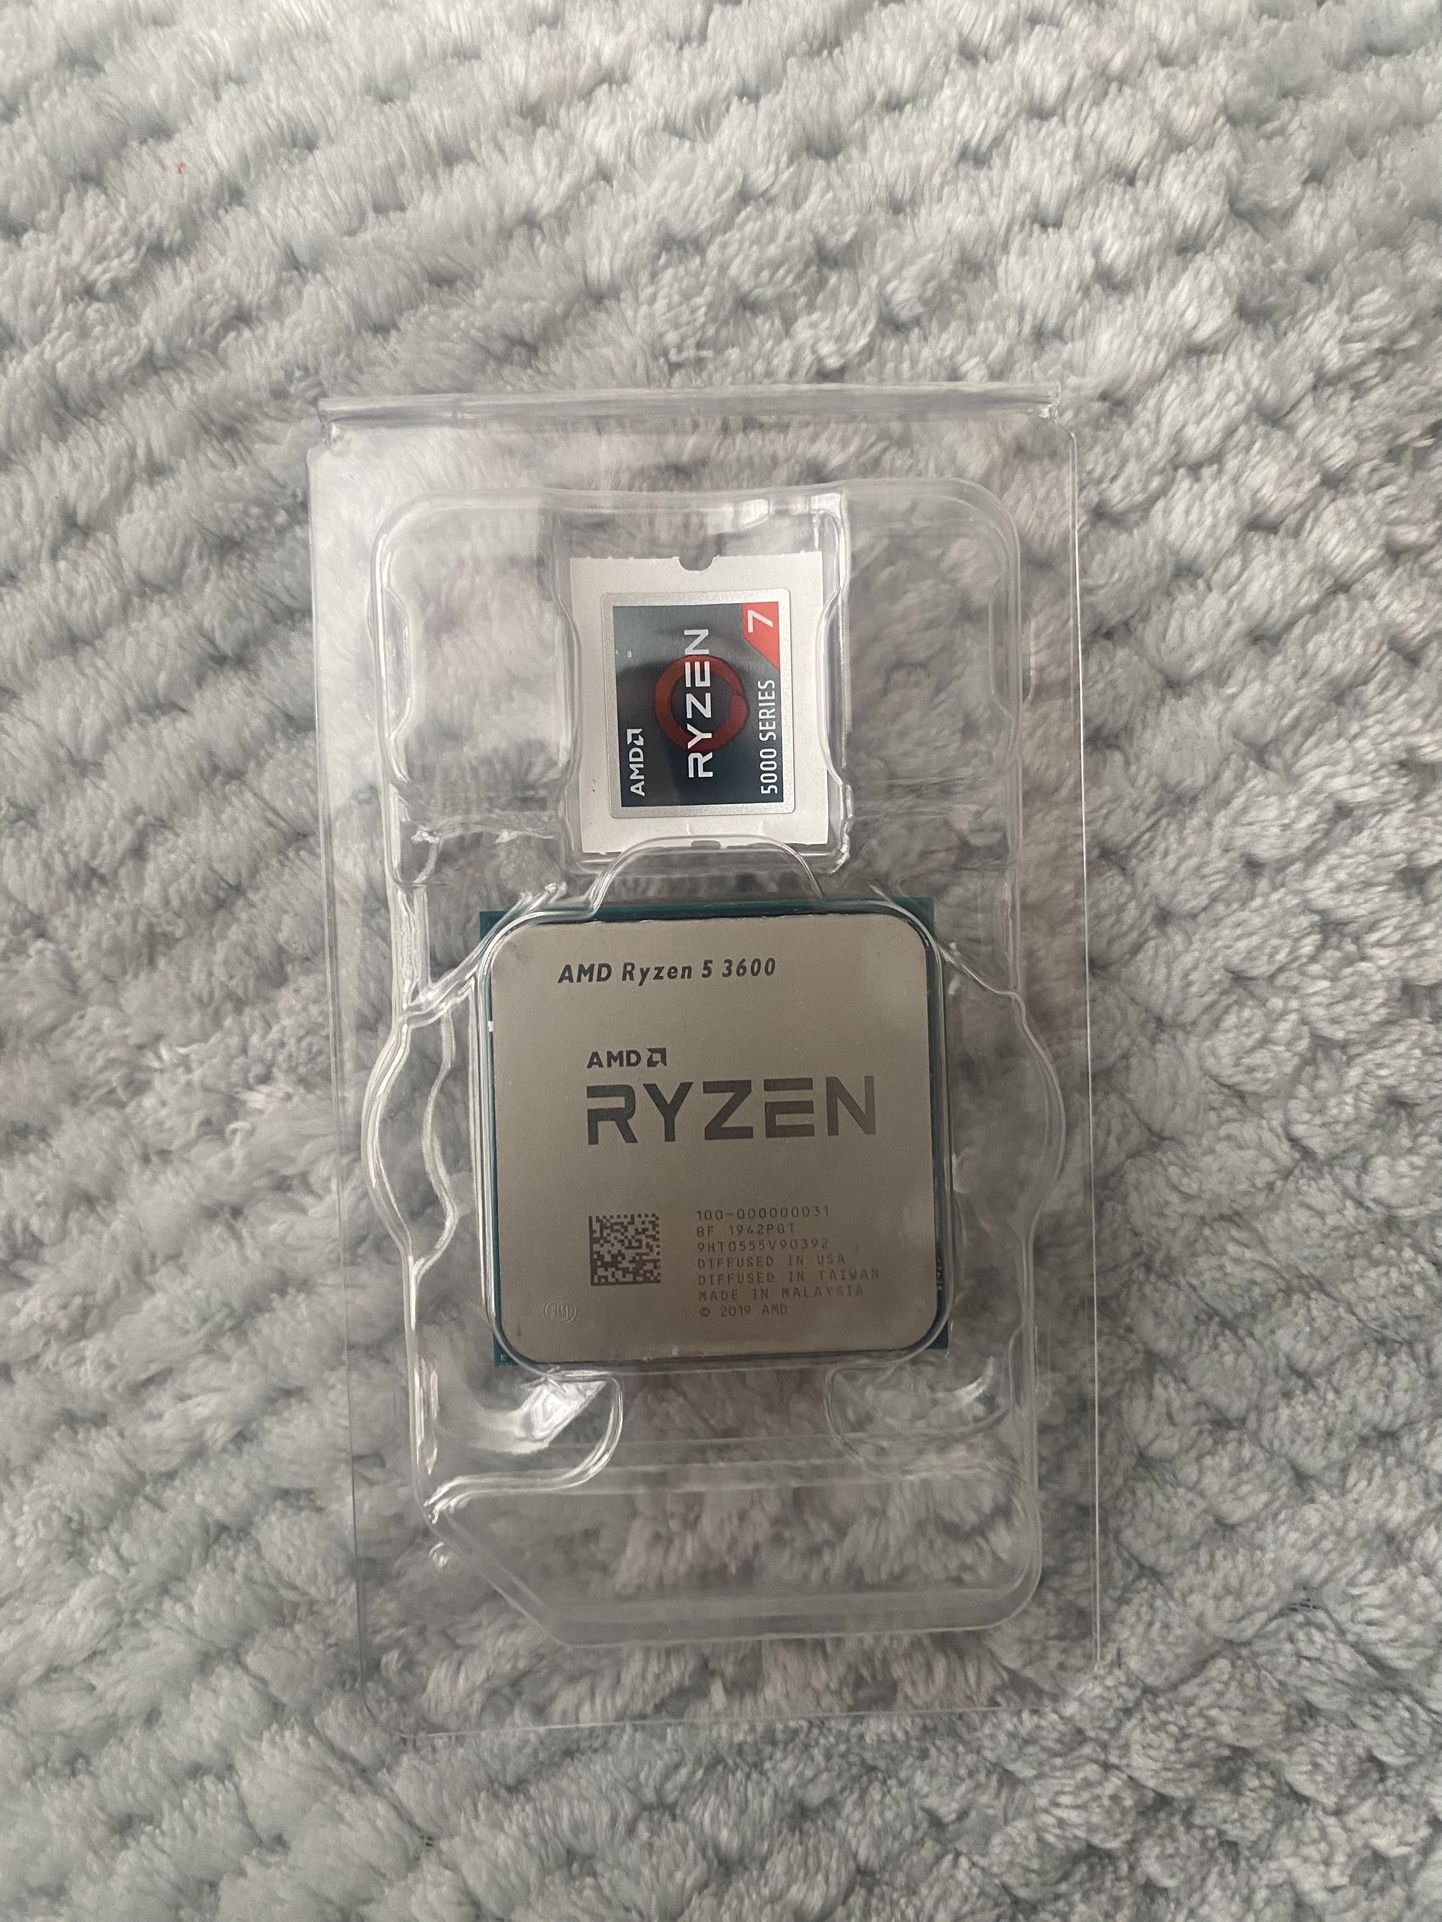 AMD Ryzen 5 3600 CPU With Wraith Stealth Cooler